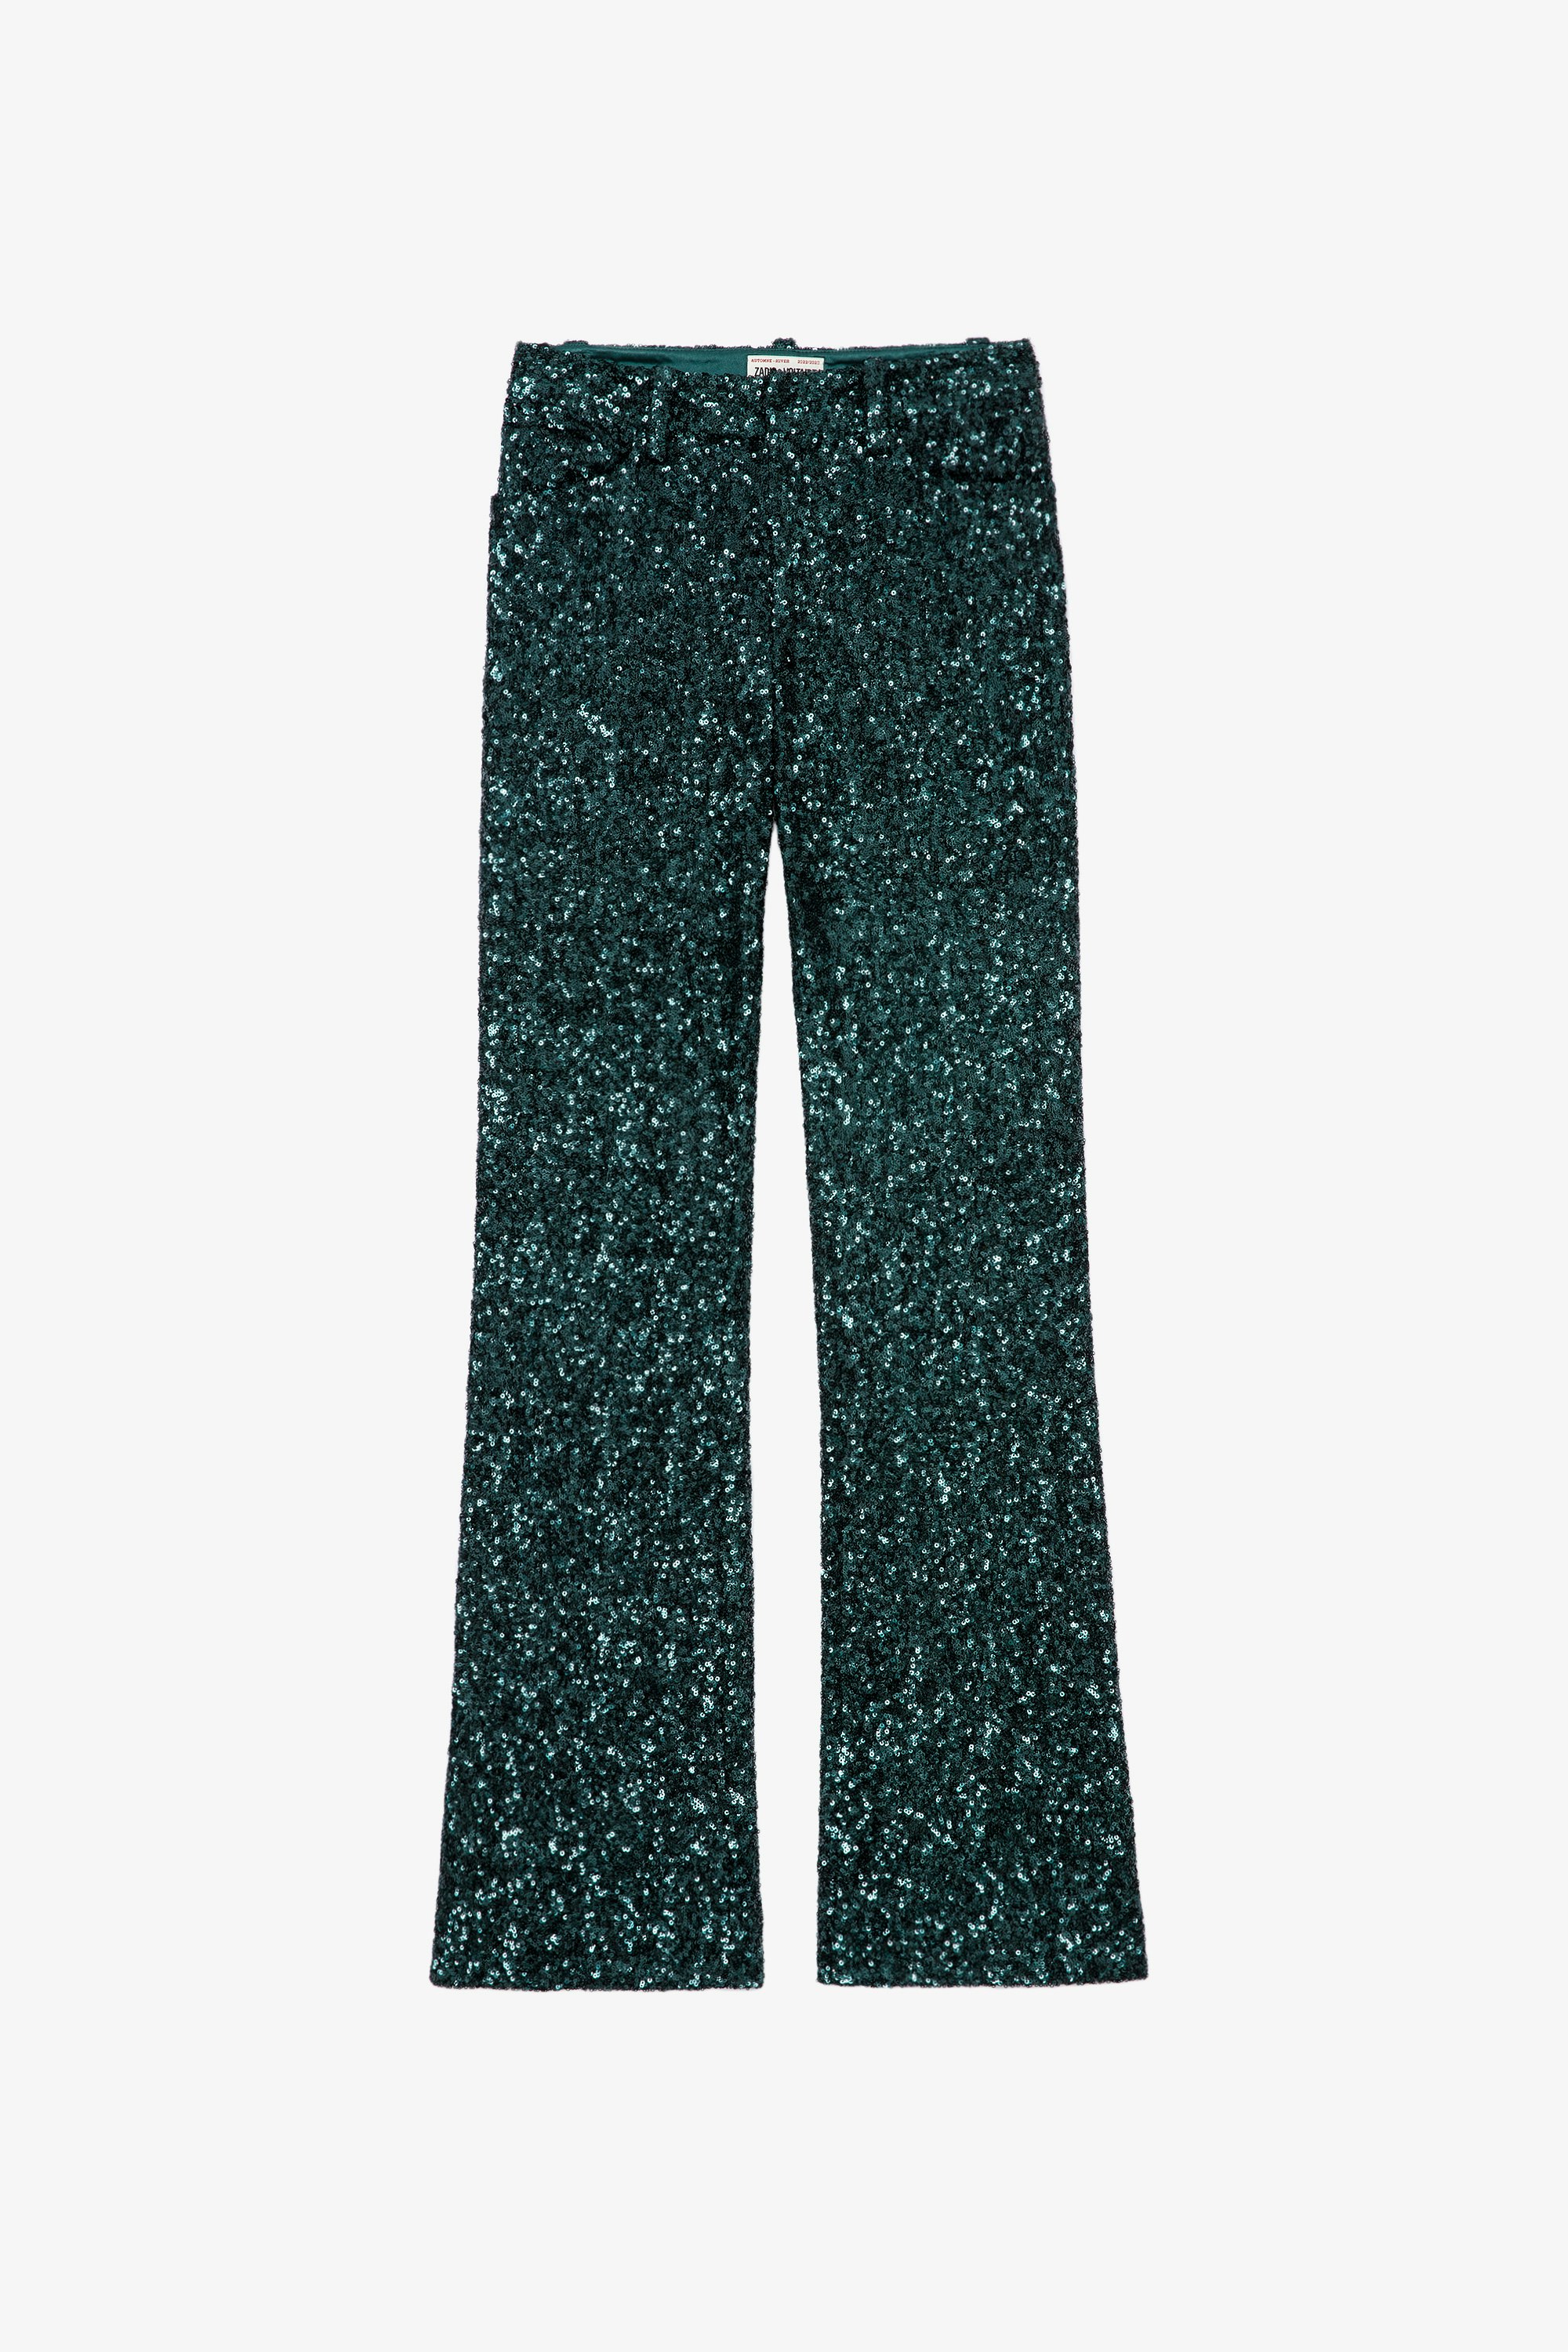 Pistol Trousers  Women's tailored trousers with all-over green sequins